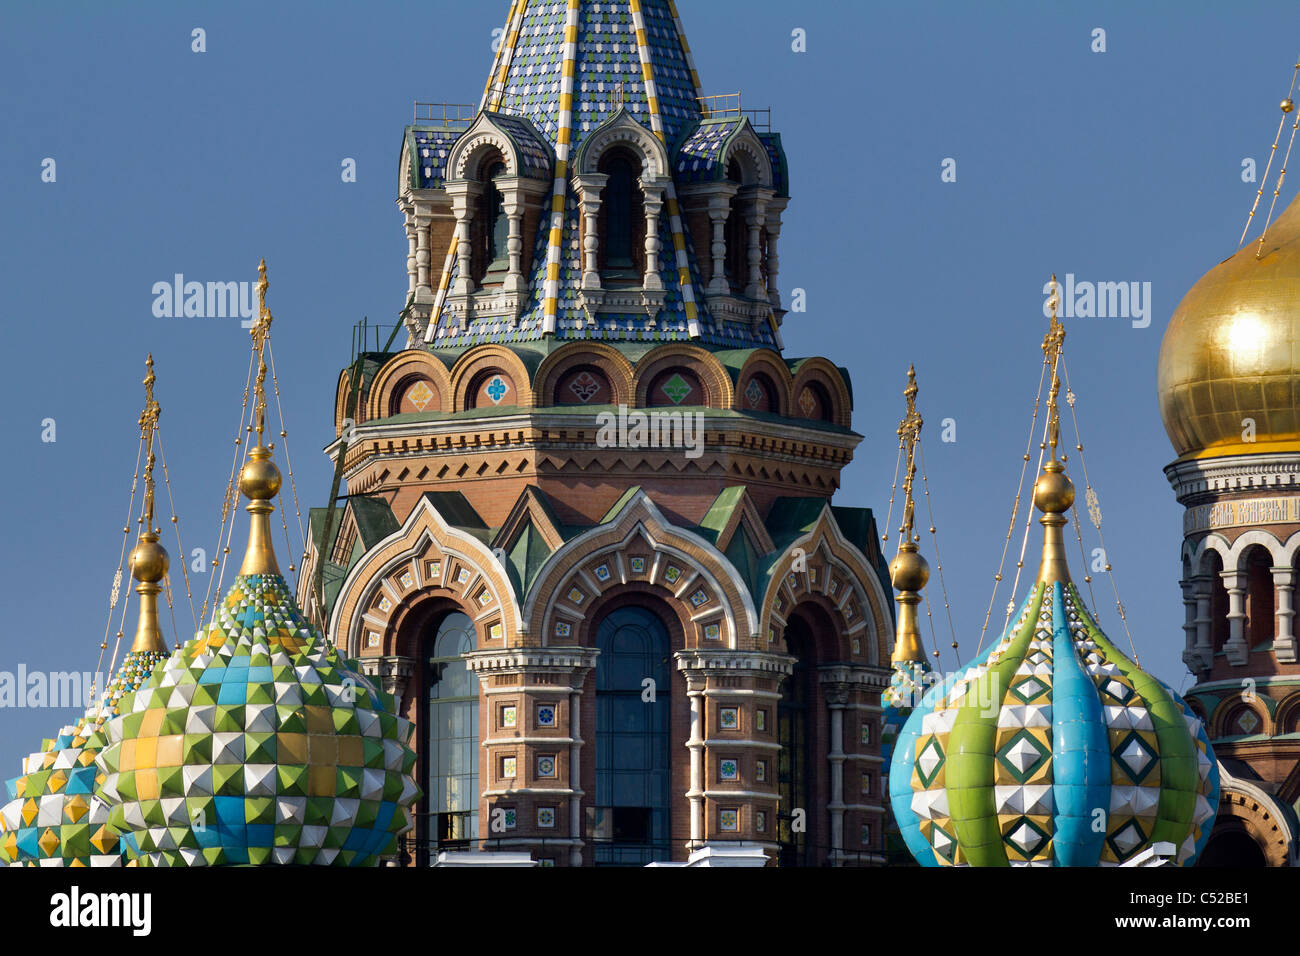 Church of the spilt blood, St Petersburg Russia 3 Stock Photo